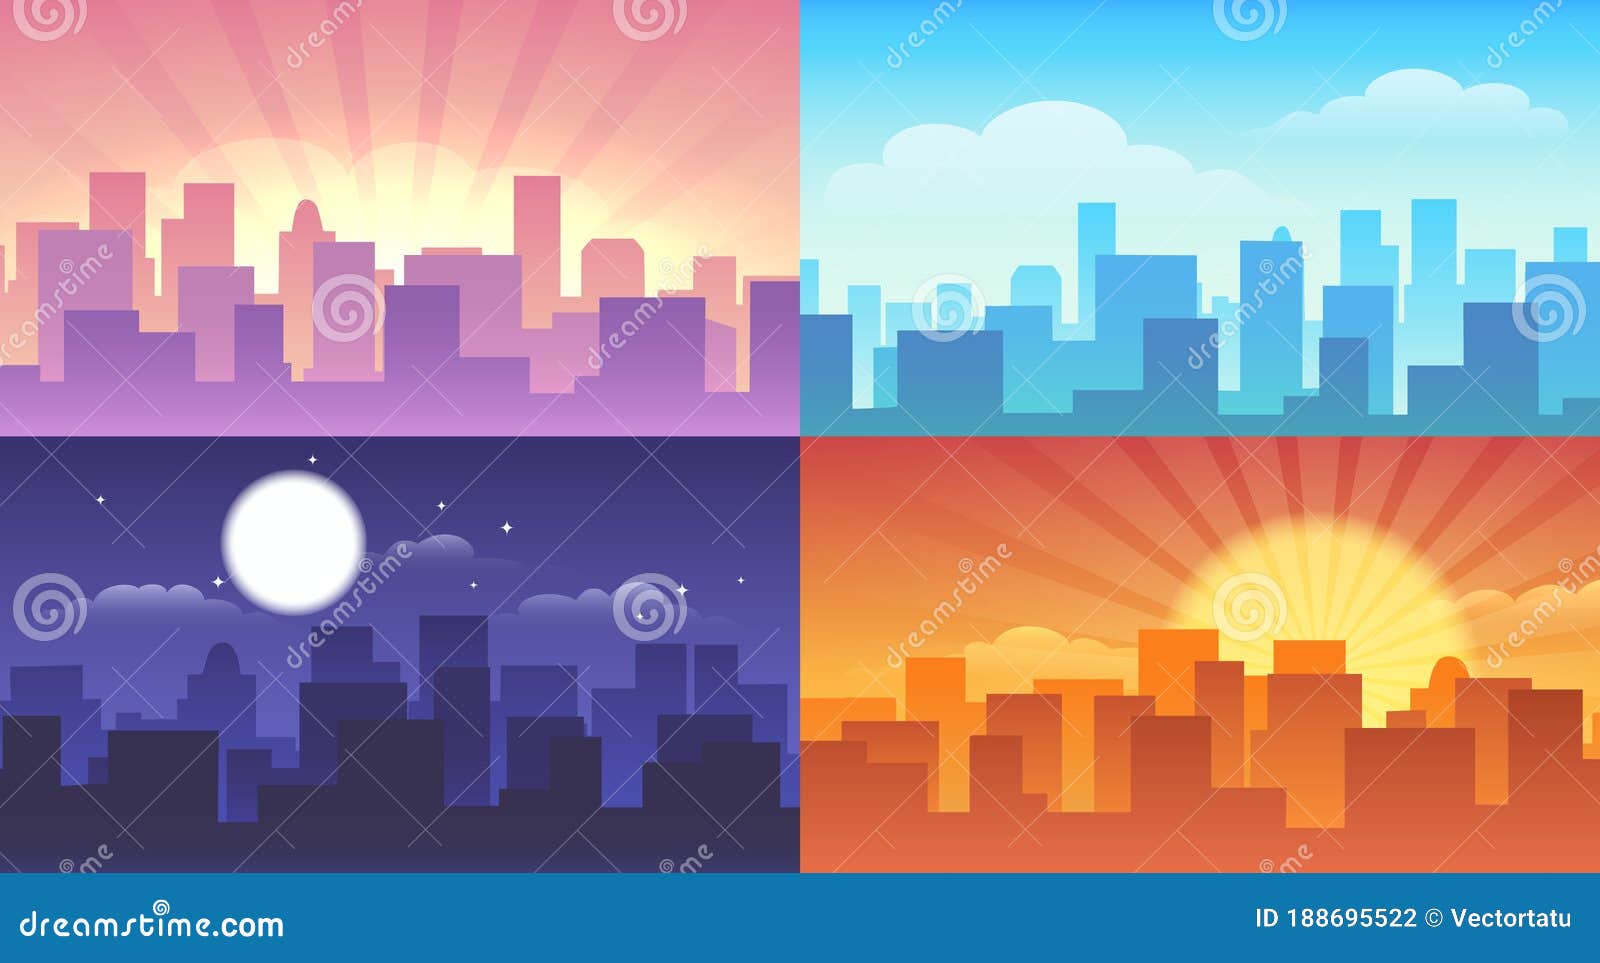 Morning Afternoon Evening Night Stock Illustrations 3 072 Morning Afternoon Evening Night Stock Illustrations Vectors Clipart Dreamstime